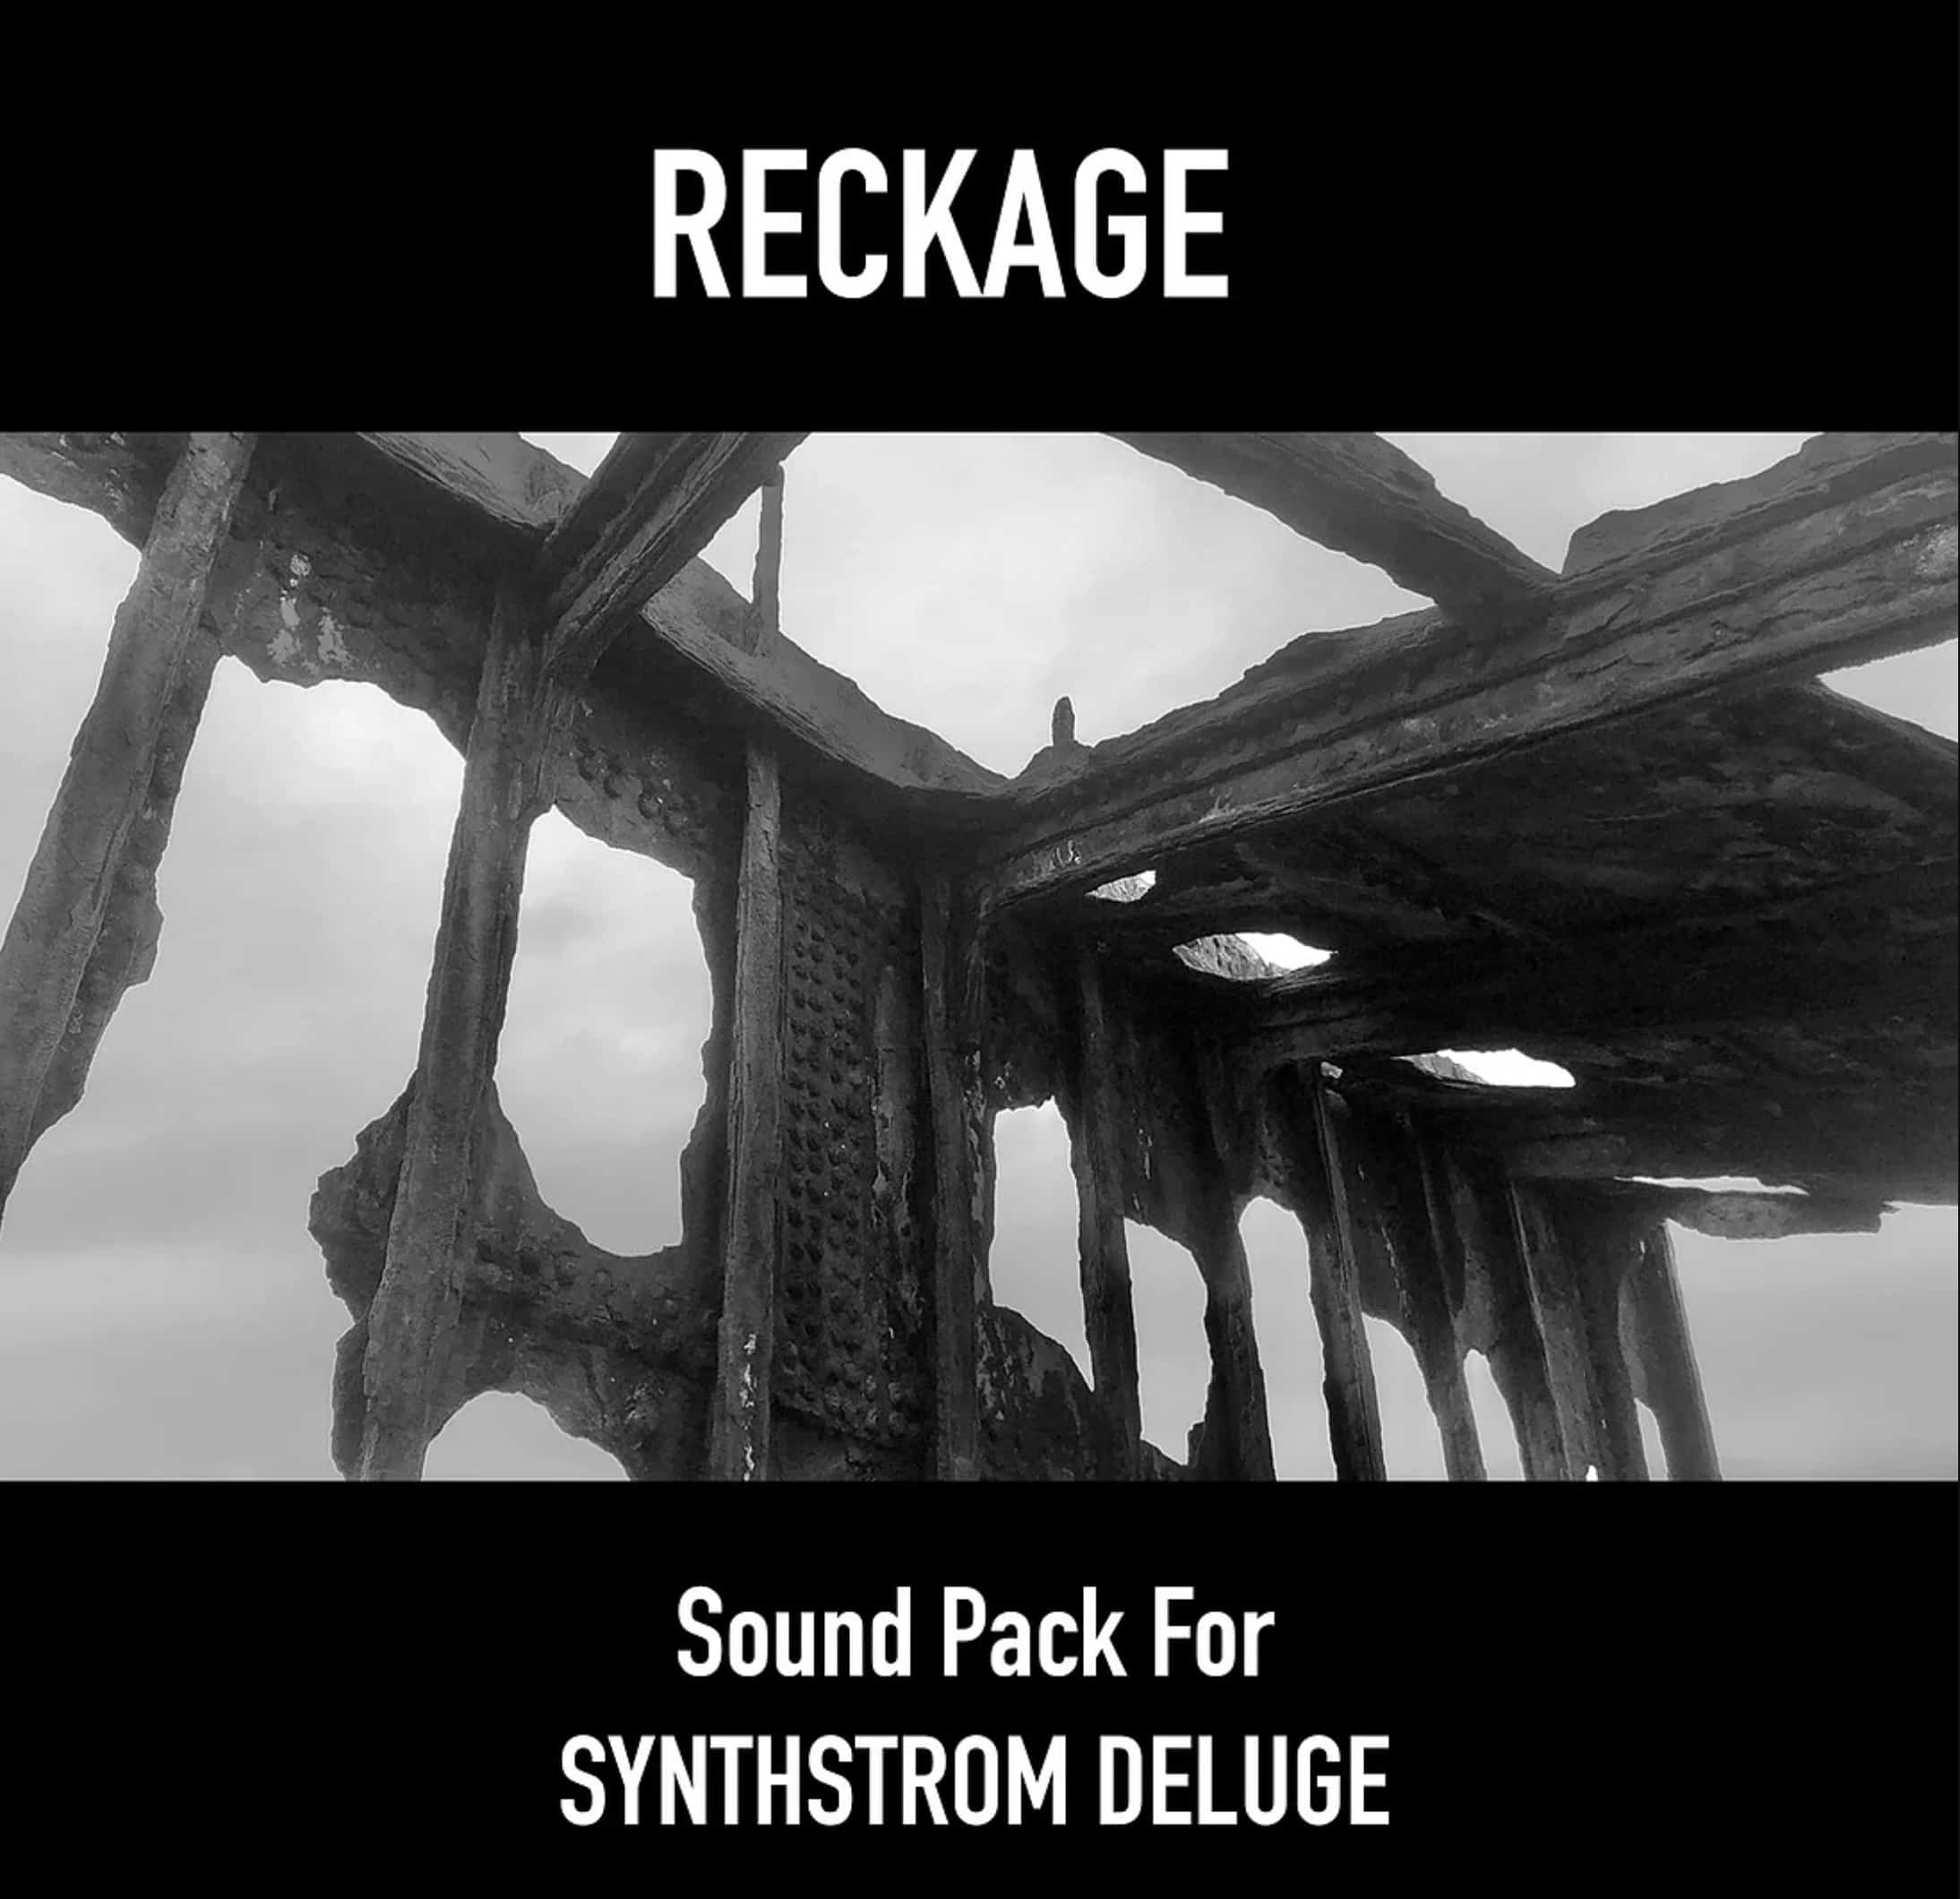 “Reckage” Dark Ambient Sound Pack for Synthstrom Deluge